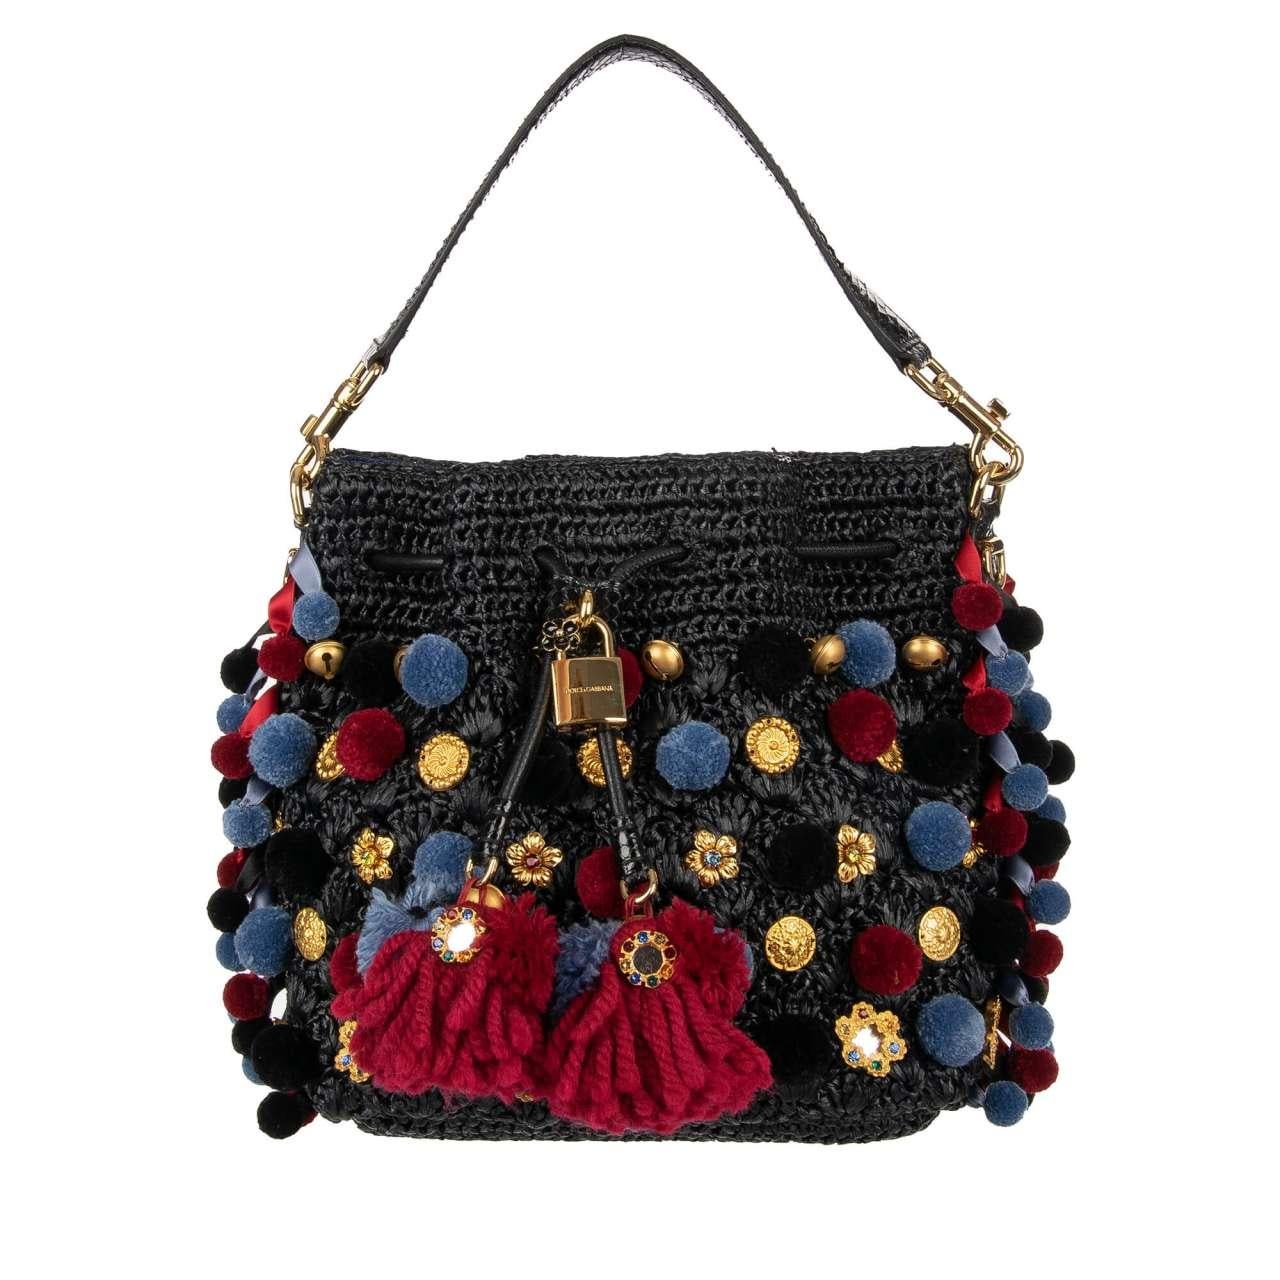 Women's Dolce & Gabbana - Raffia Bucket Bag CLAUDIA with Pompoms and Crystals Black Red